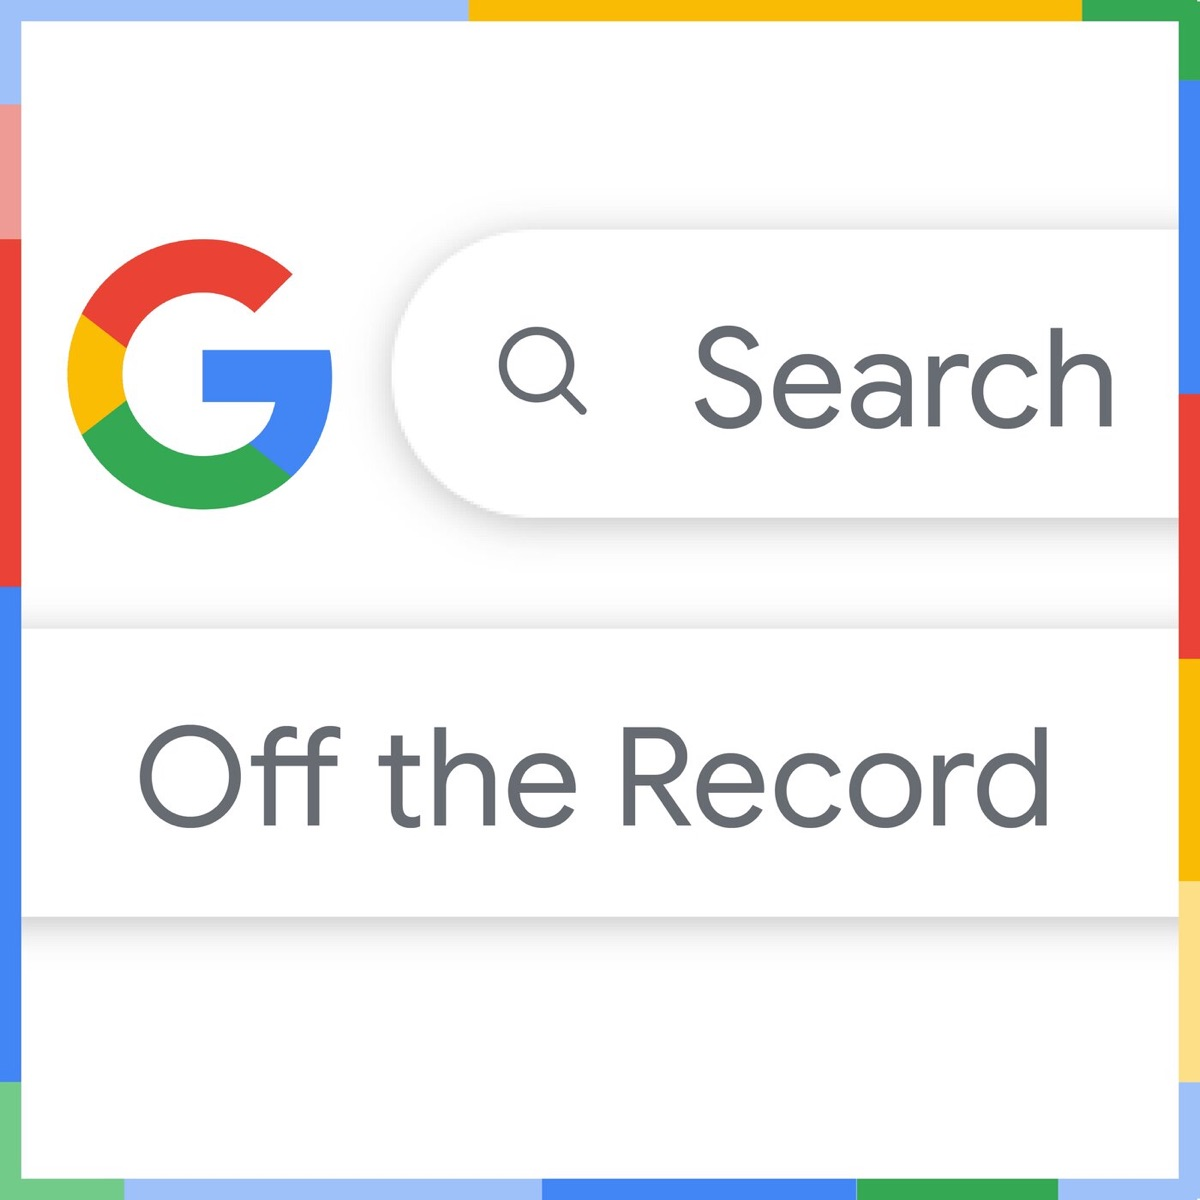 Search bar of google. Overlay text "Off the Record"